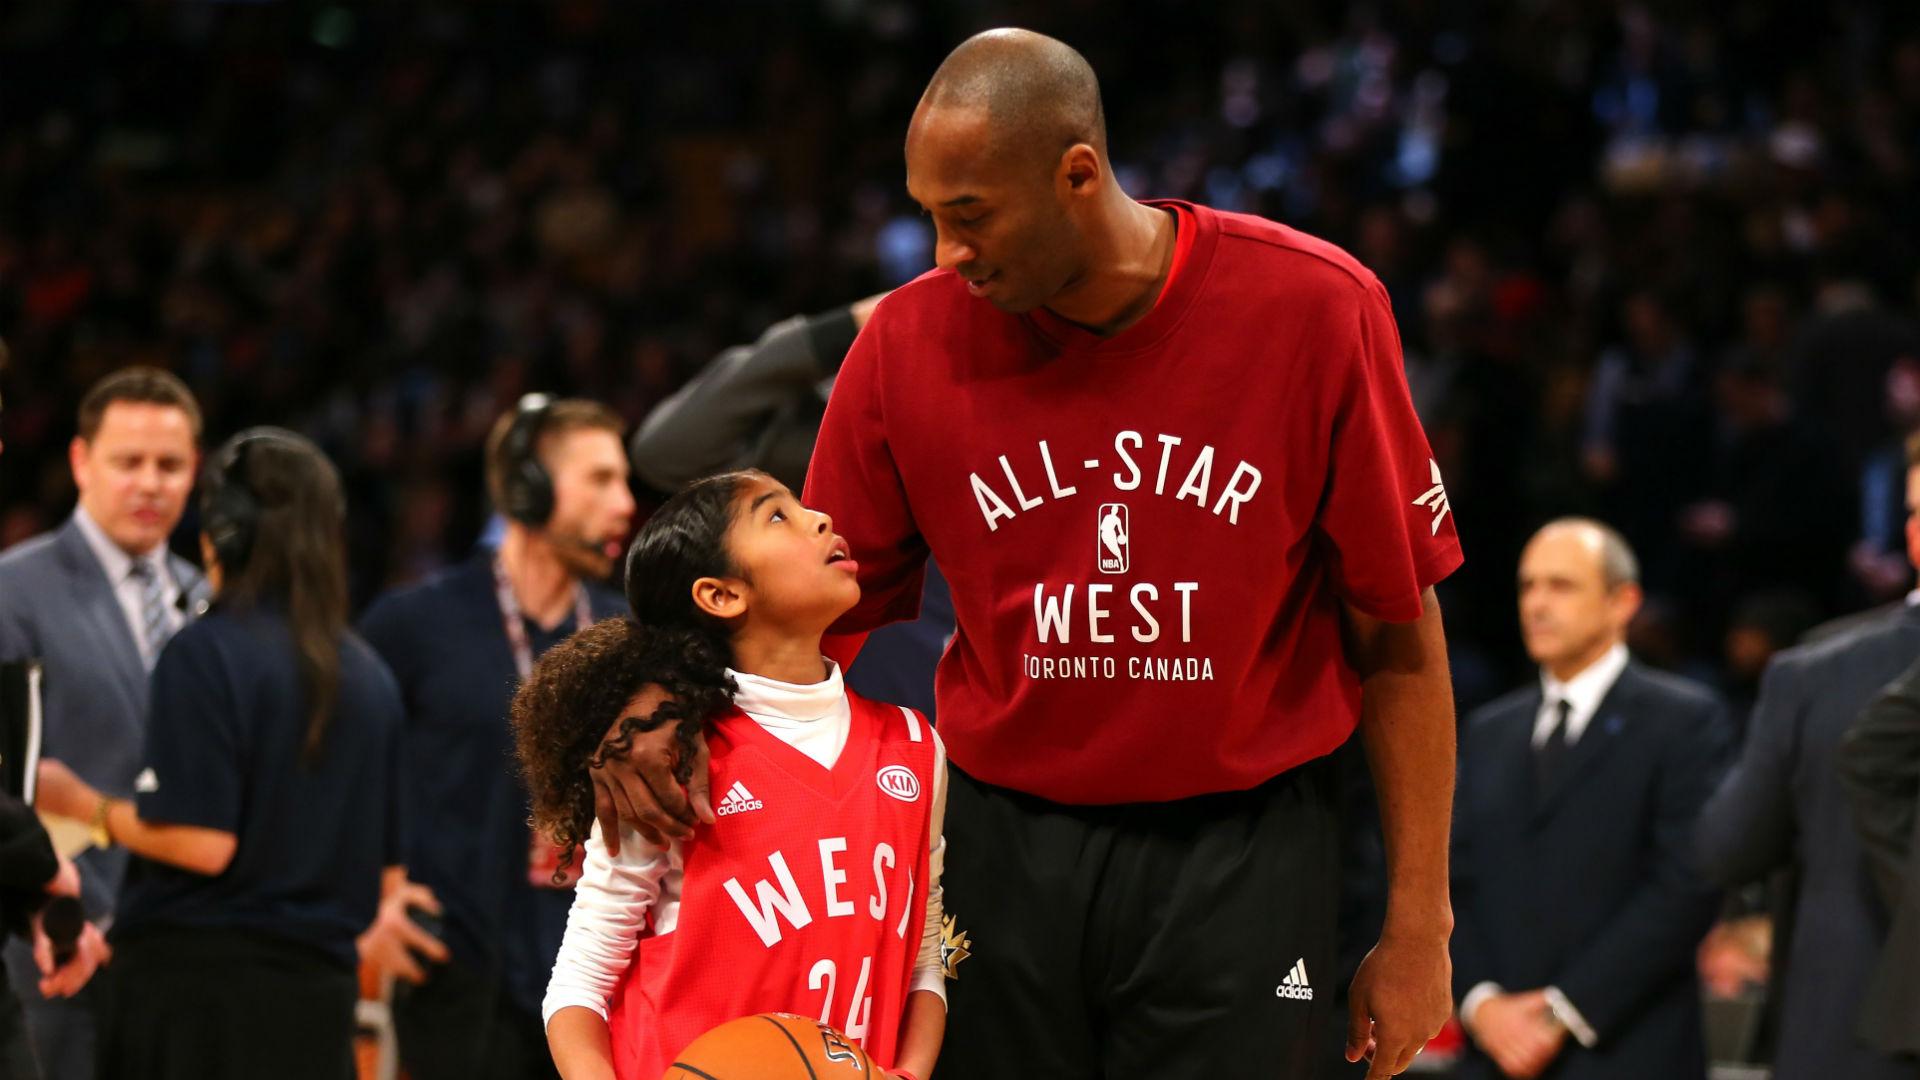 Kobe Bryant's daughter Gianna brought out the best side